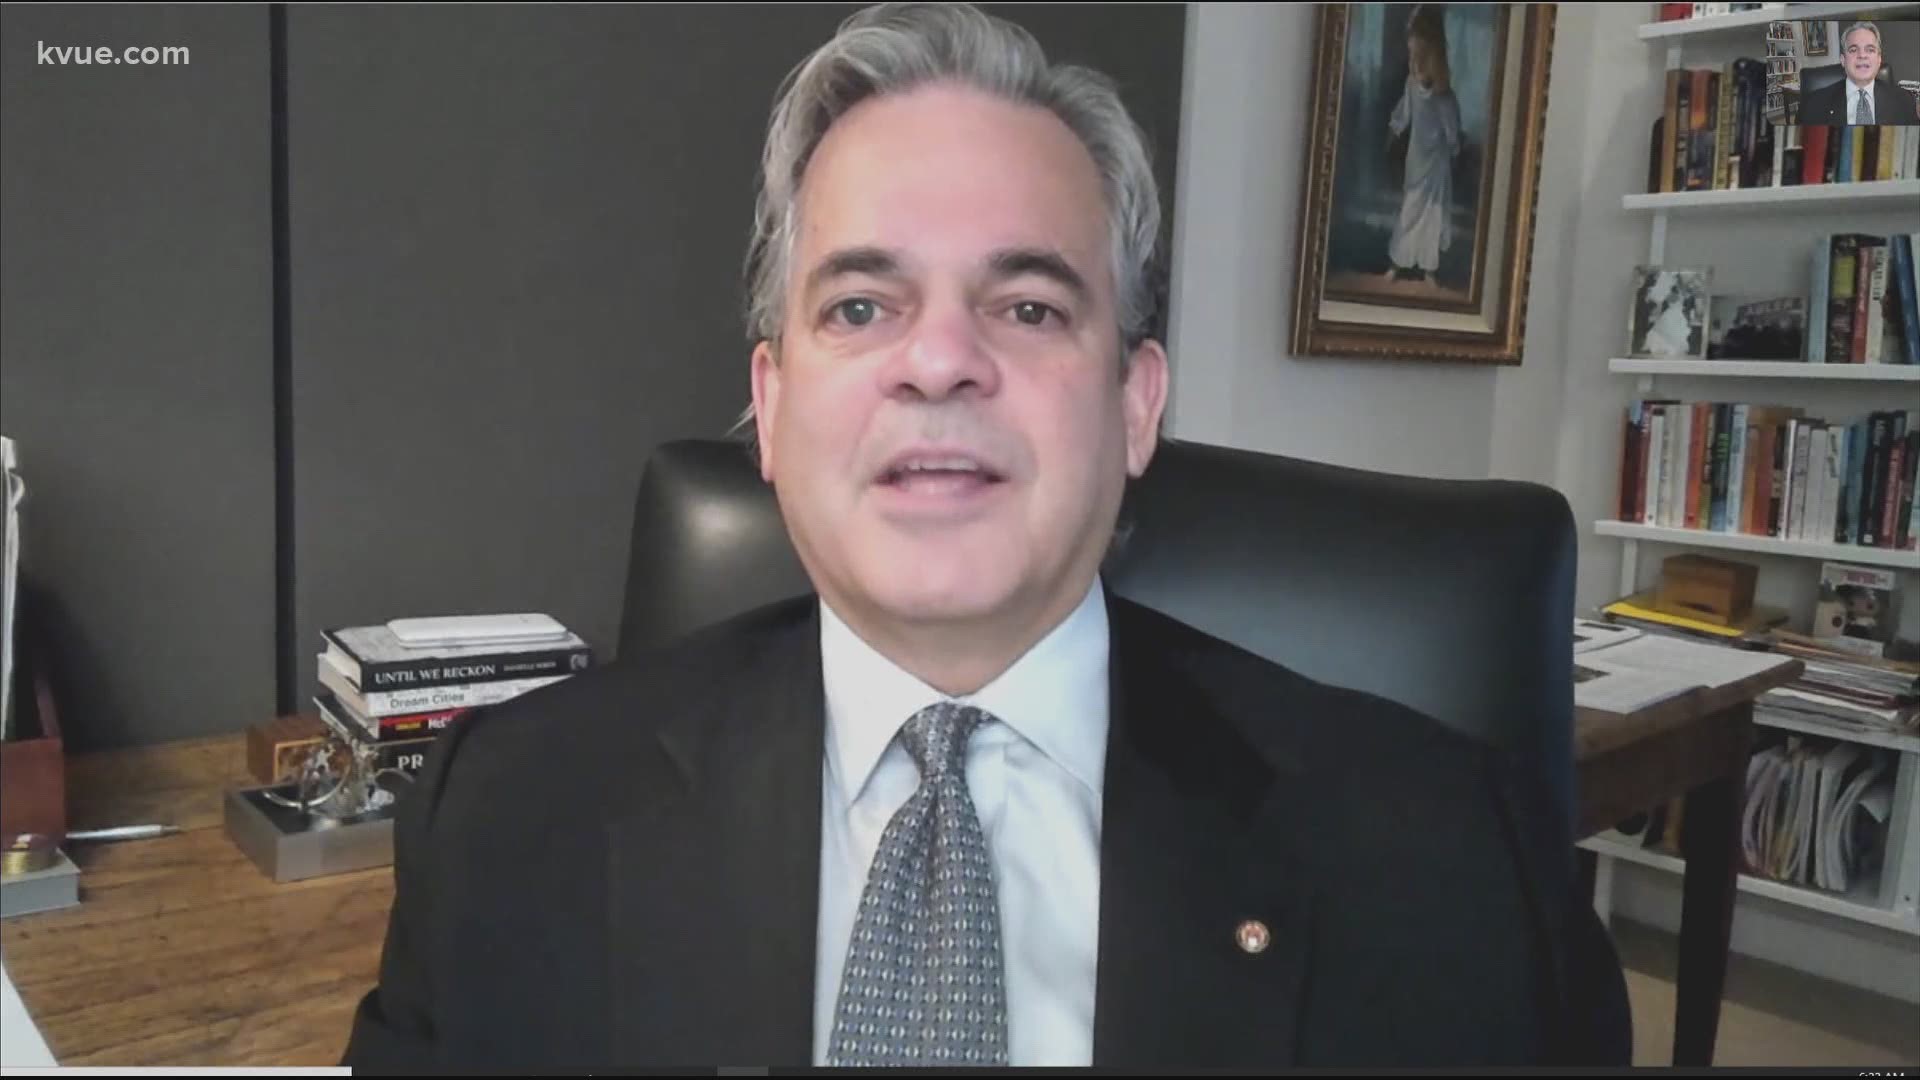 Mayor Steve Adler talked about the deadly Black Lives Matter protest in Downtown Austin over the weekend, and he gave an update on COVID-19 in the Austin area.